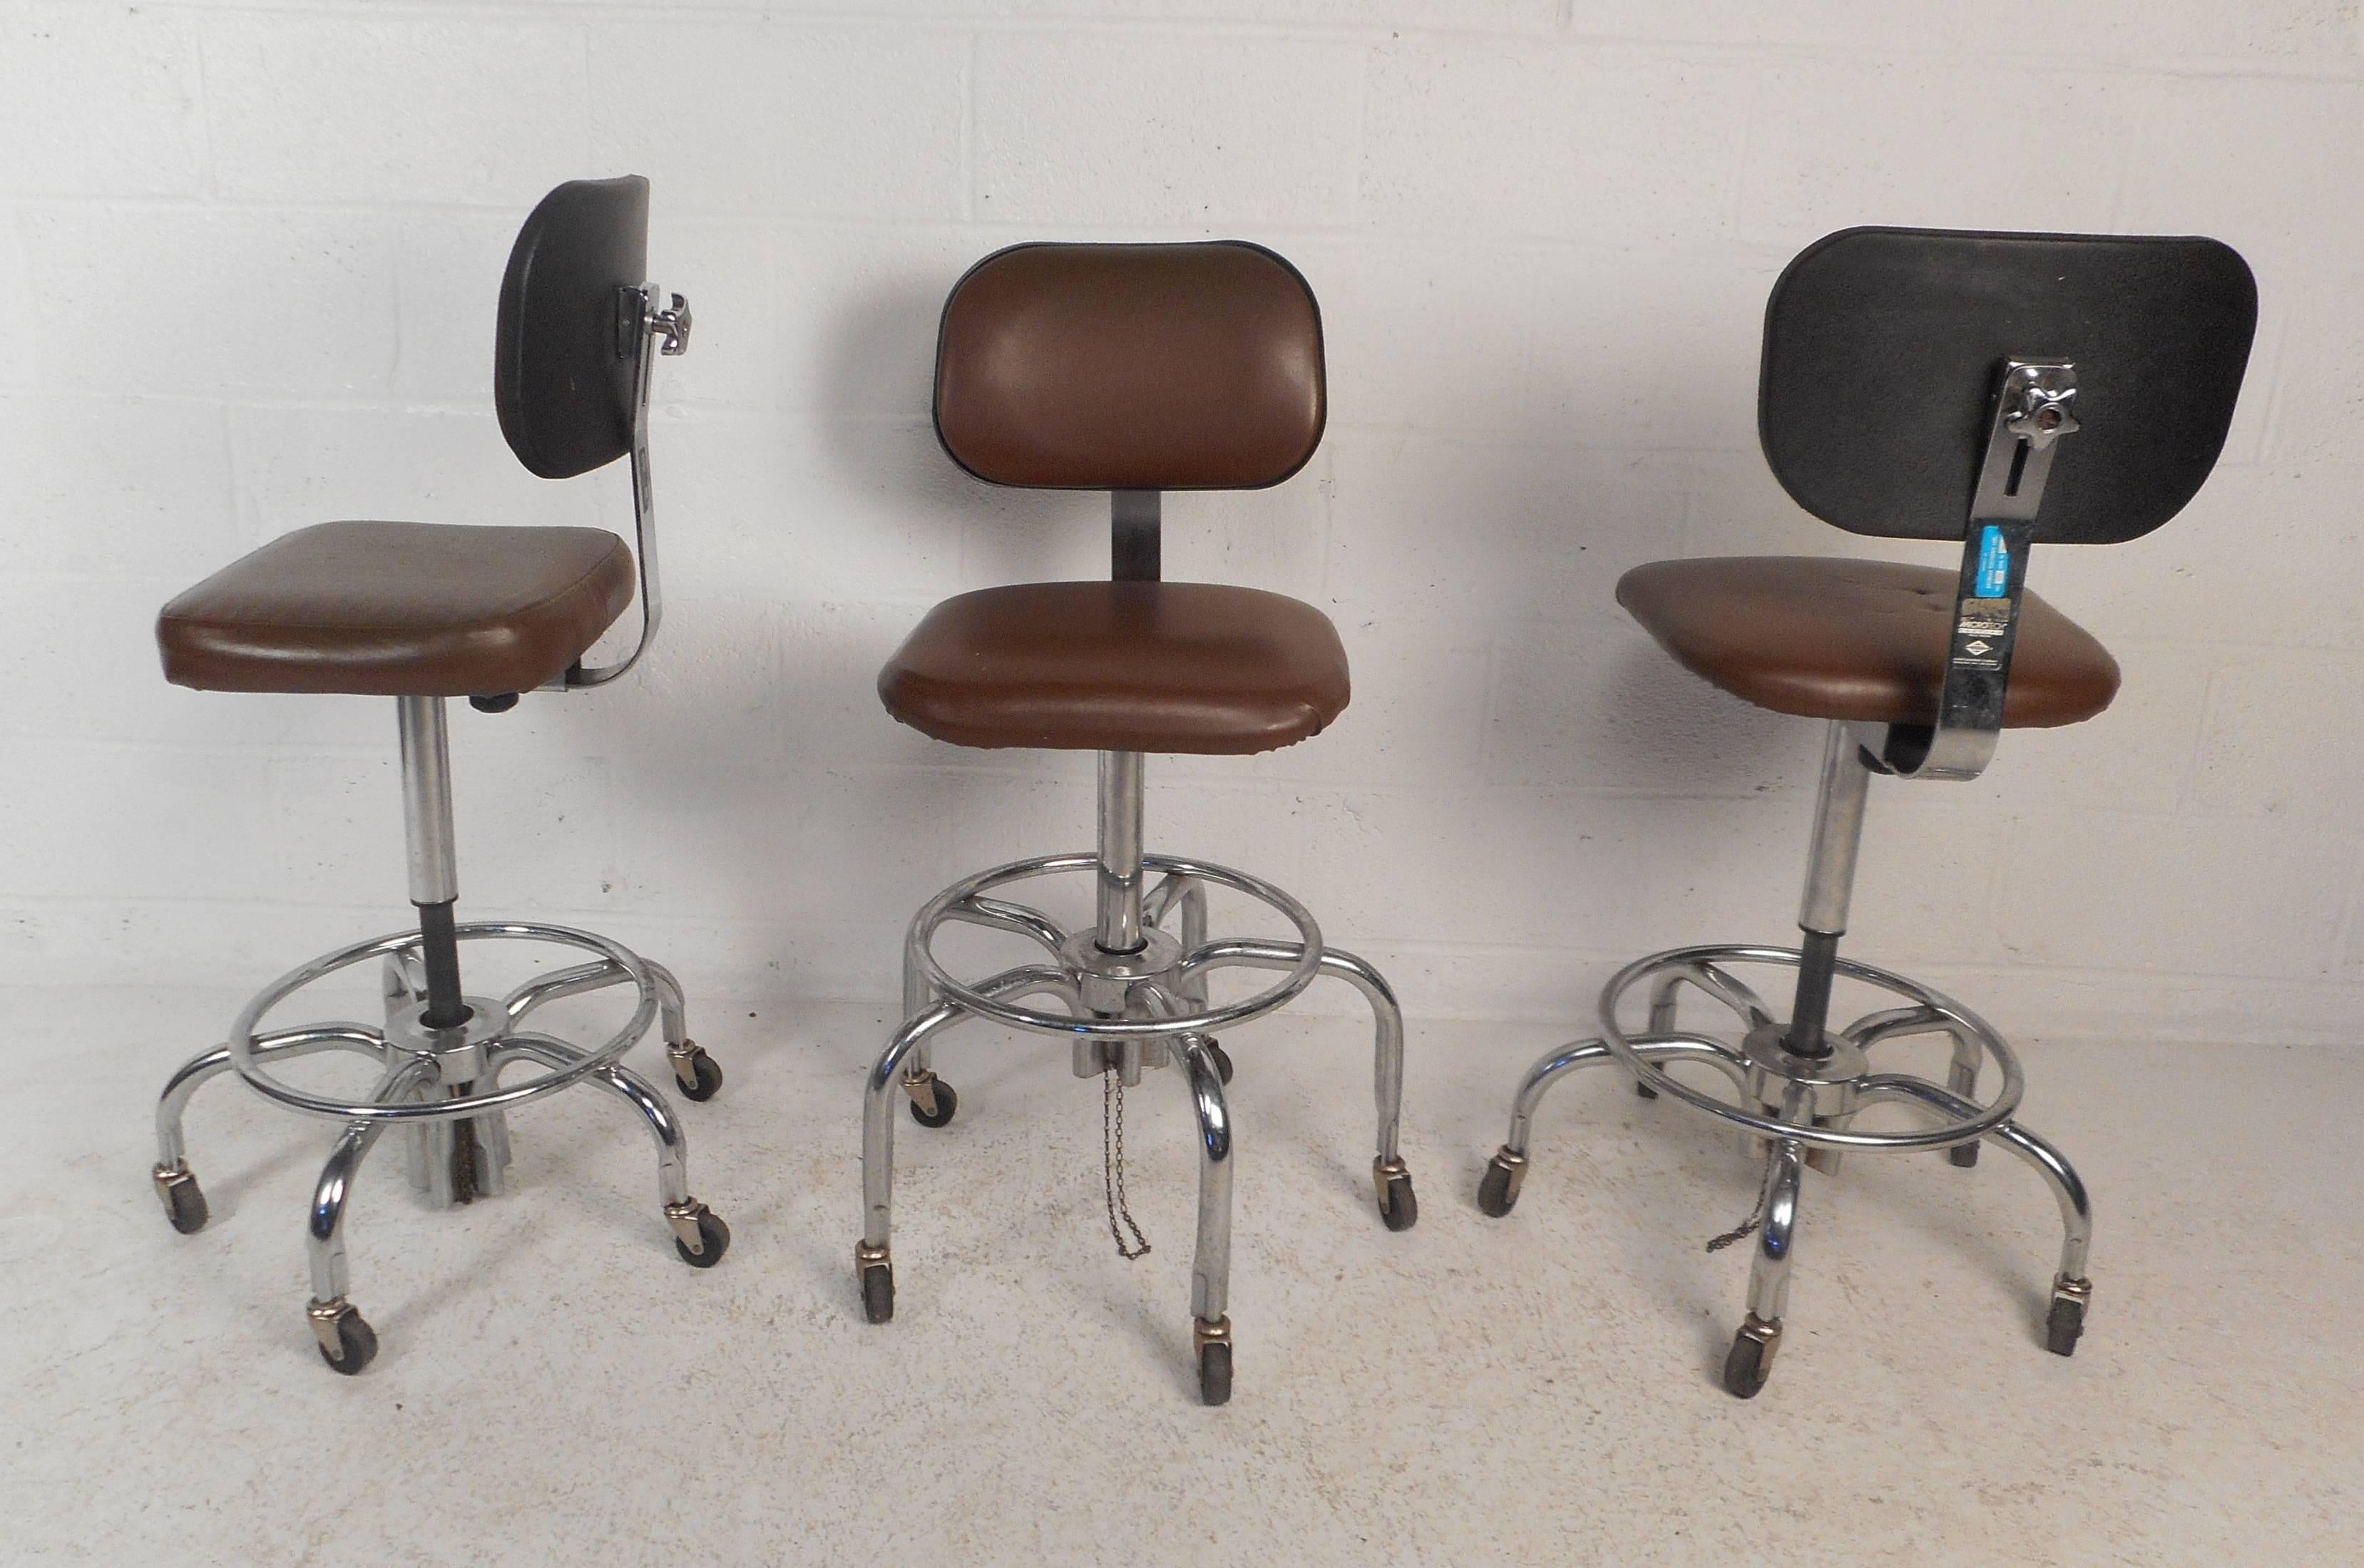 Gorgeous set of three vintage modern bar stools with unique bent rod chrome bases and thick padded seats covered in dark brown vinyl. Sleek design ensures plenty of comfort with its high padded backrest and convenient adjustable frame. This